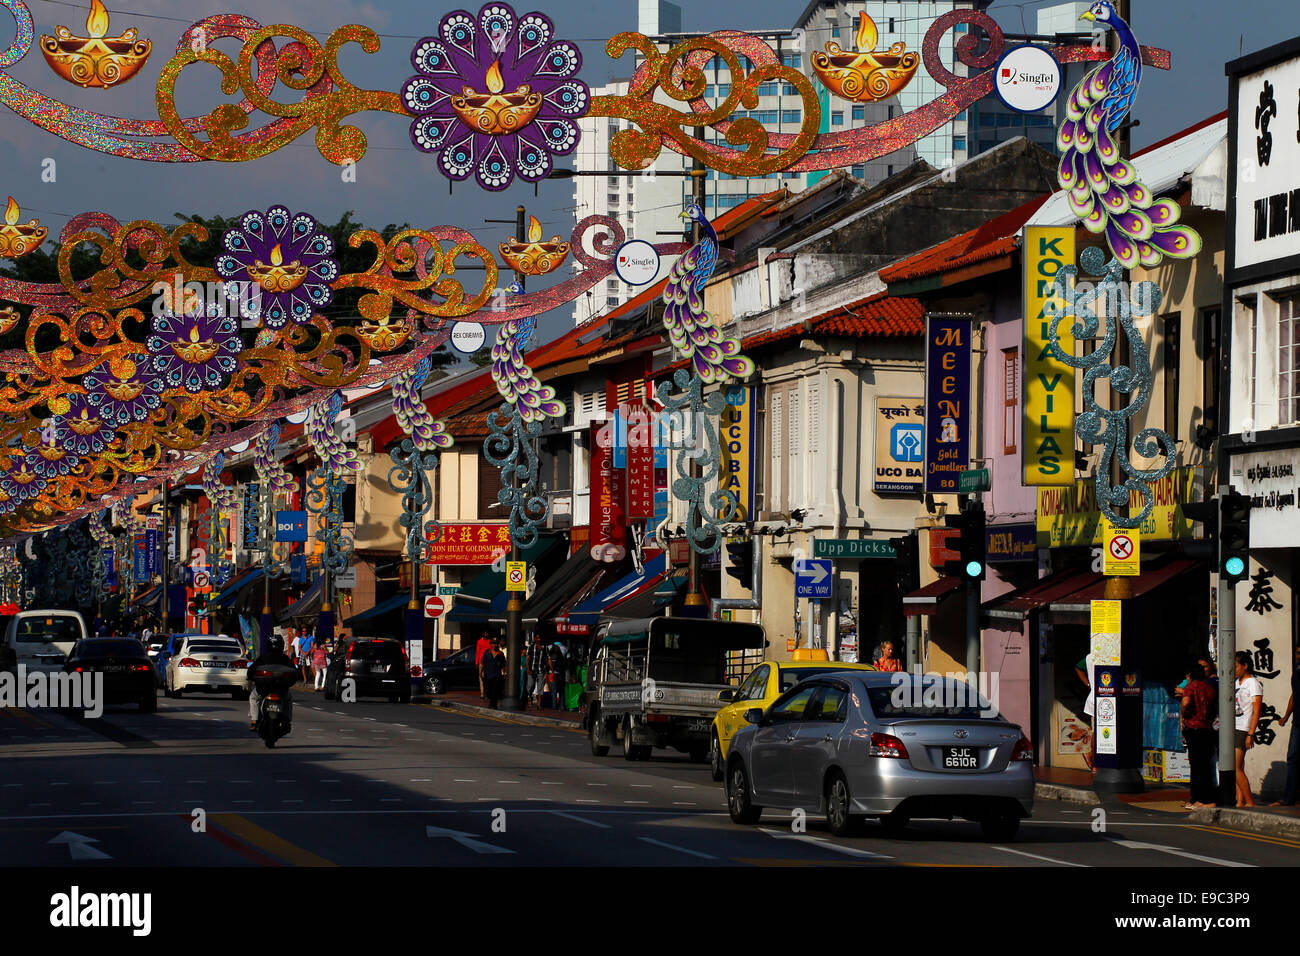 Serangoon Road in Little India with Deepavali decorations in the street, Singapore Stock Photo